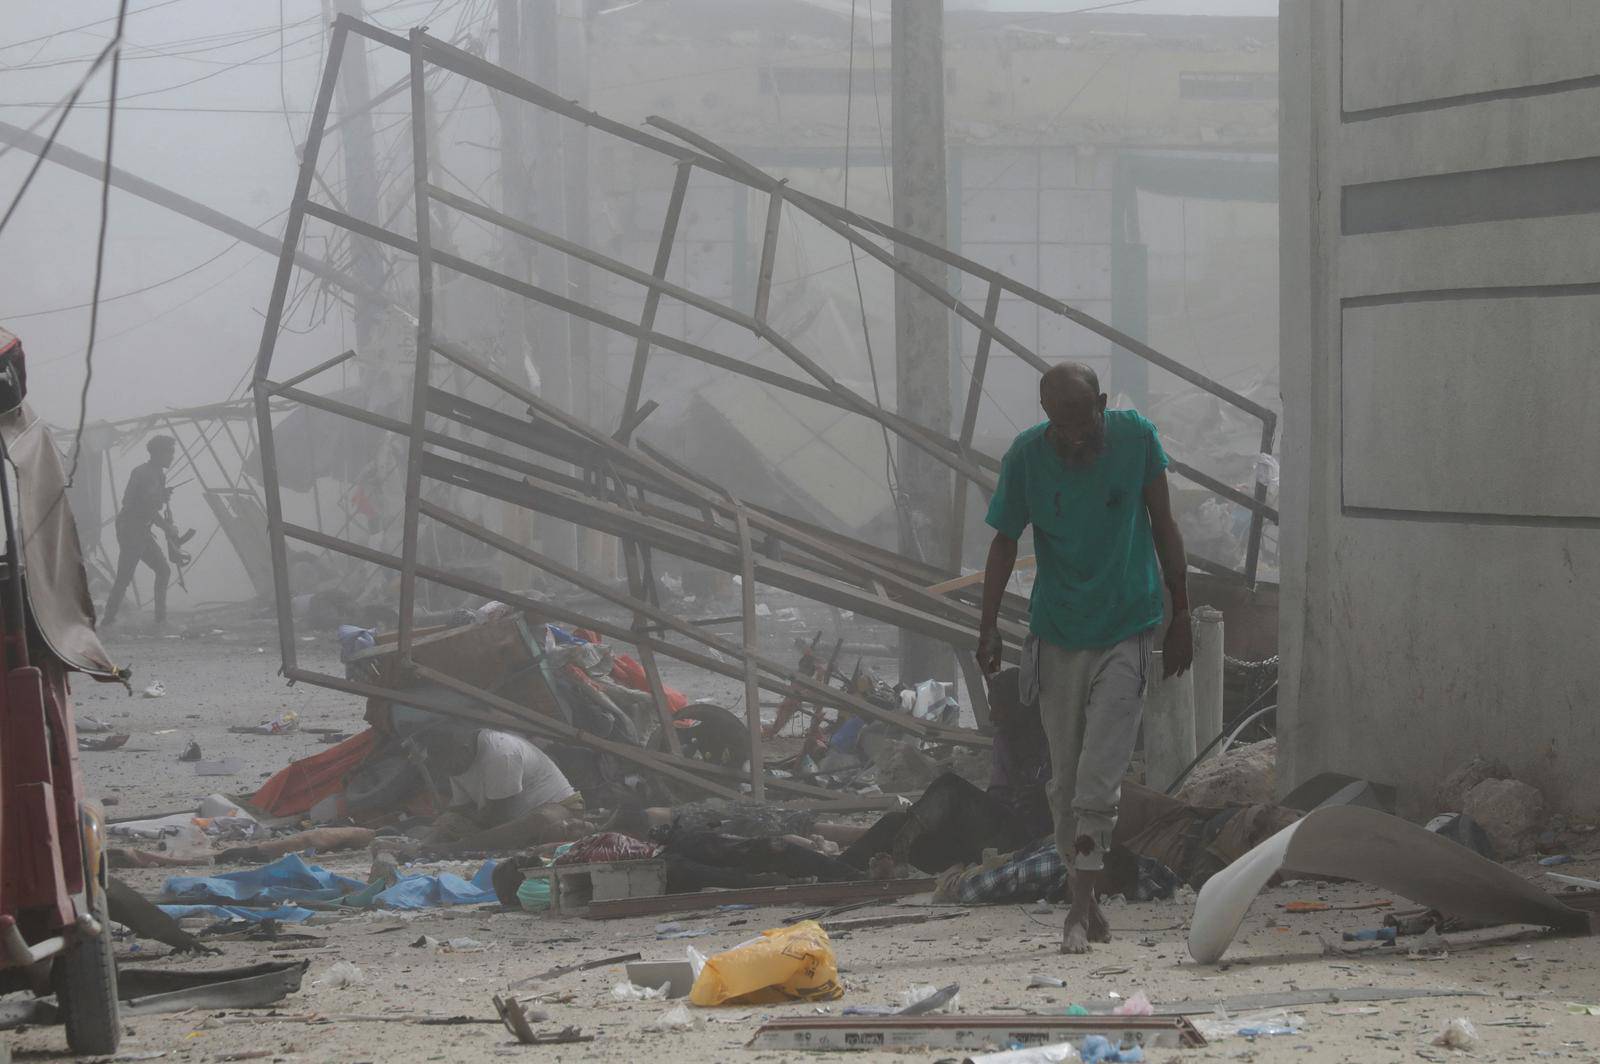 Injured civilians are aeen at the scene of an explosion near the education ministry building along K5 street in Mogadishu